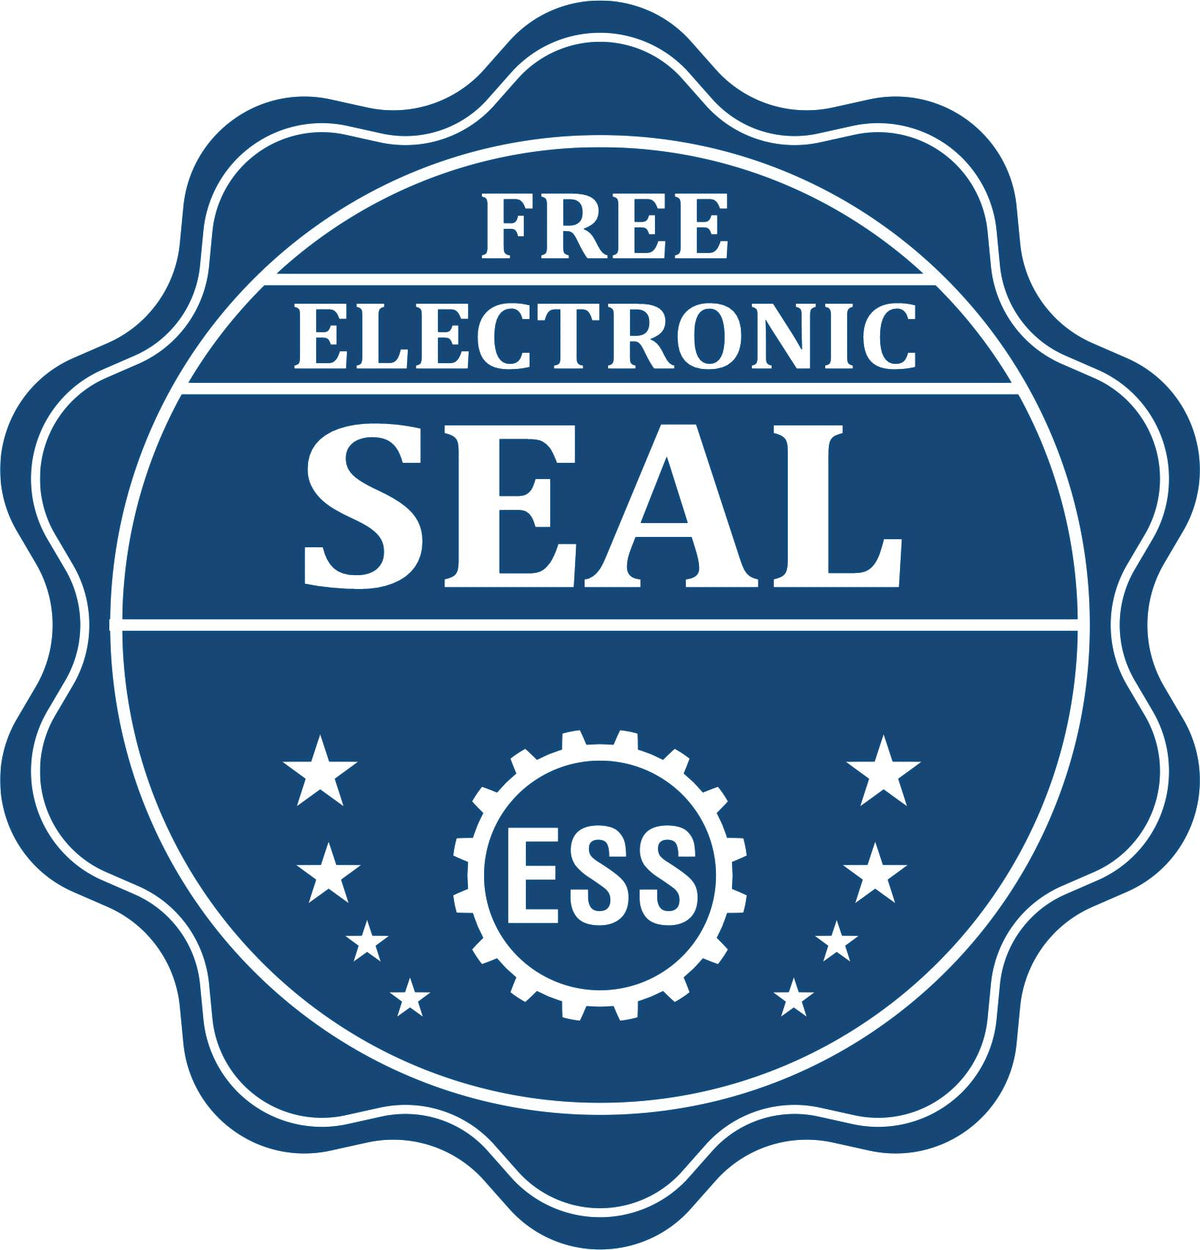 A badge showing a free electronic seal for the Gift Georgia Engineer Seal with stars and the ESS gear on the emblem.